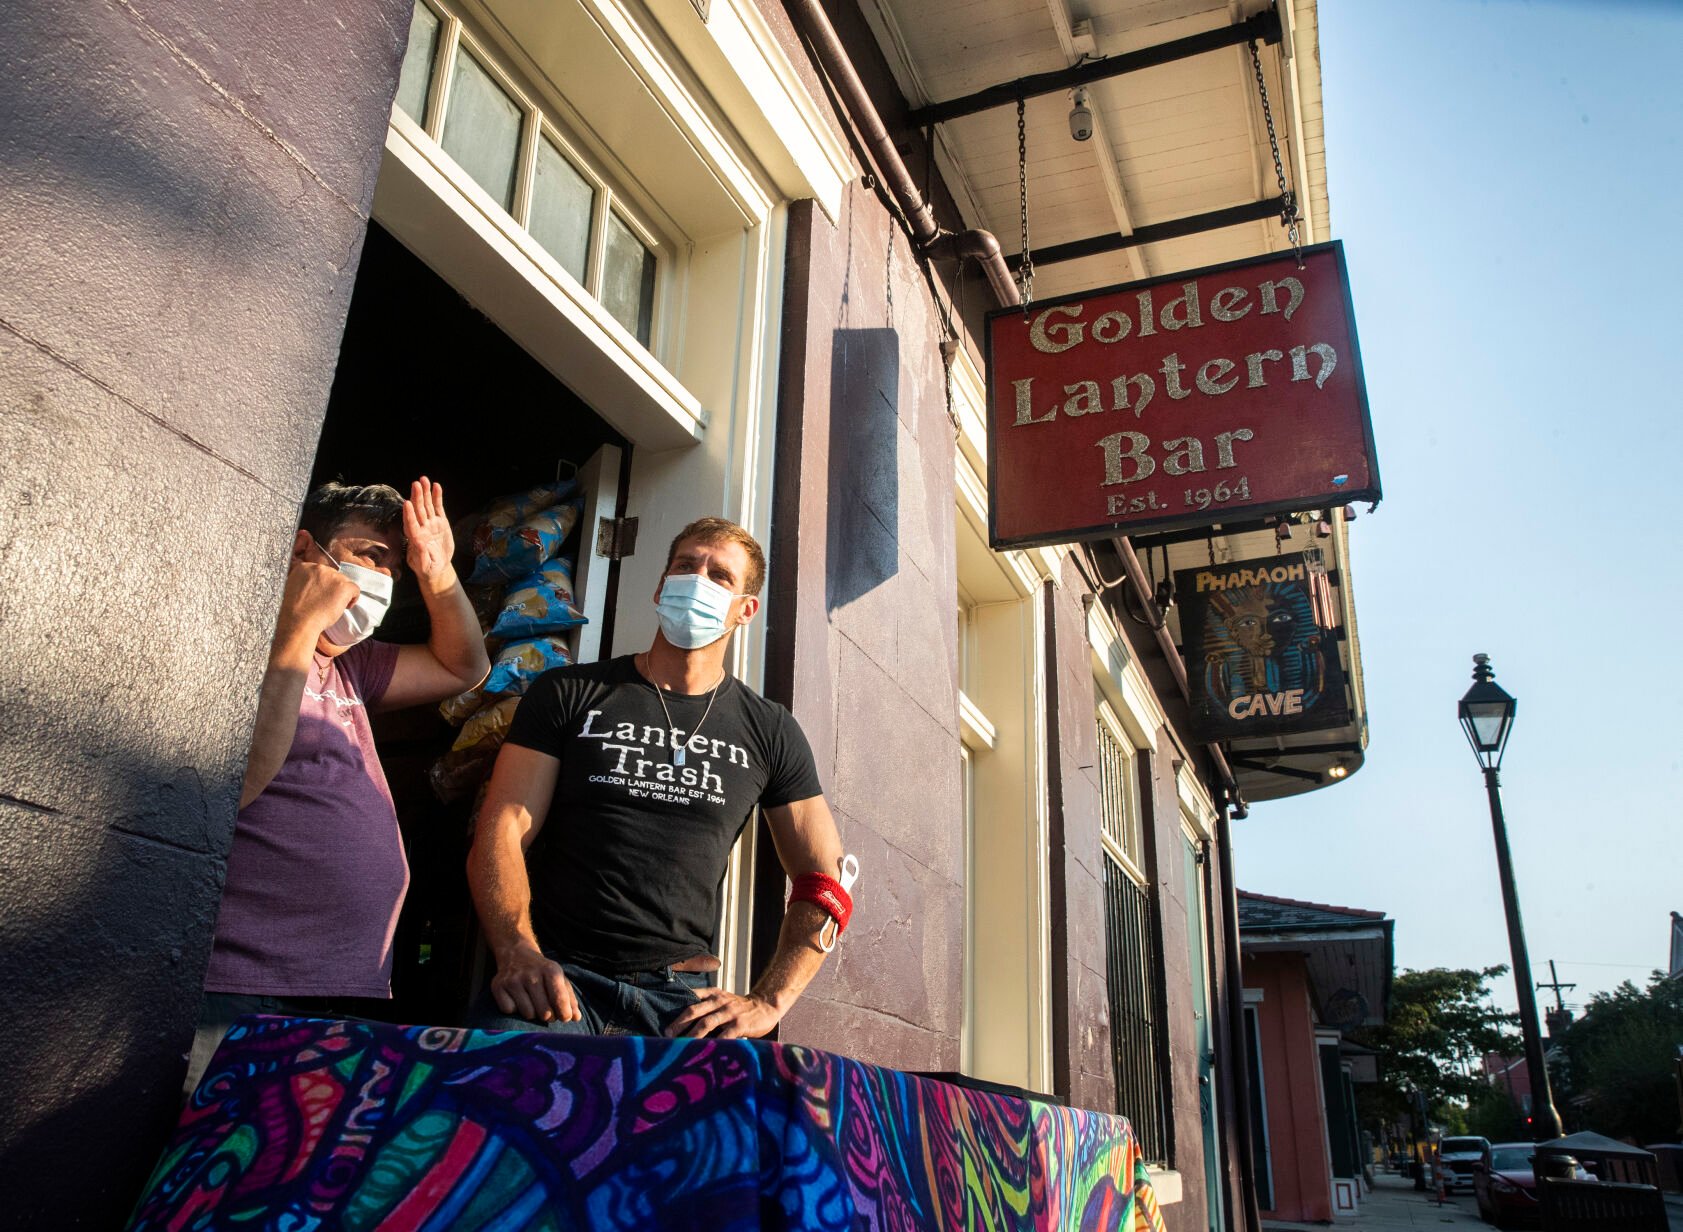 gay bars new orleans images